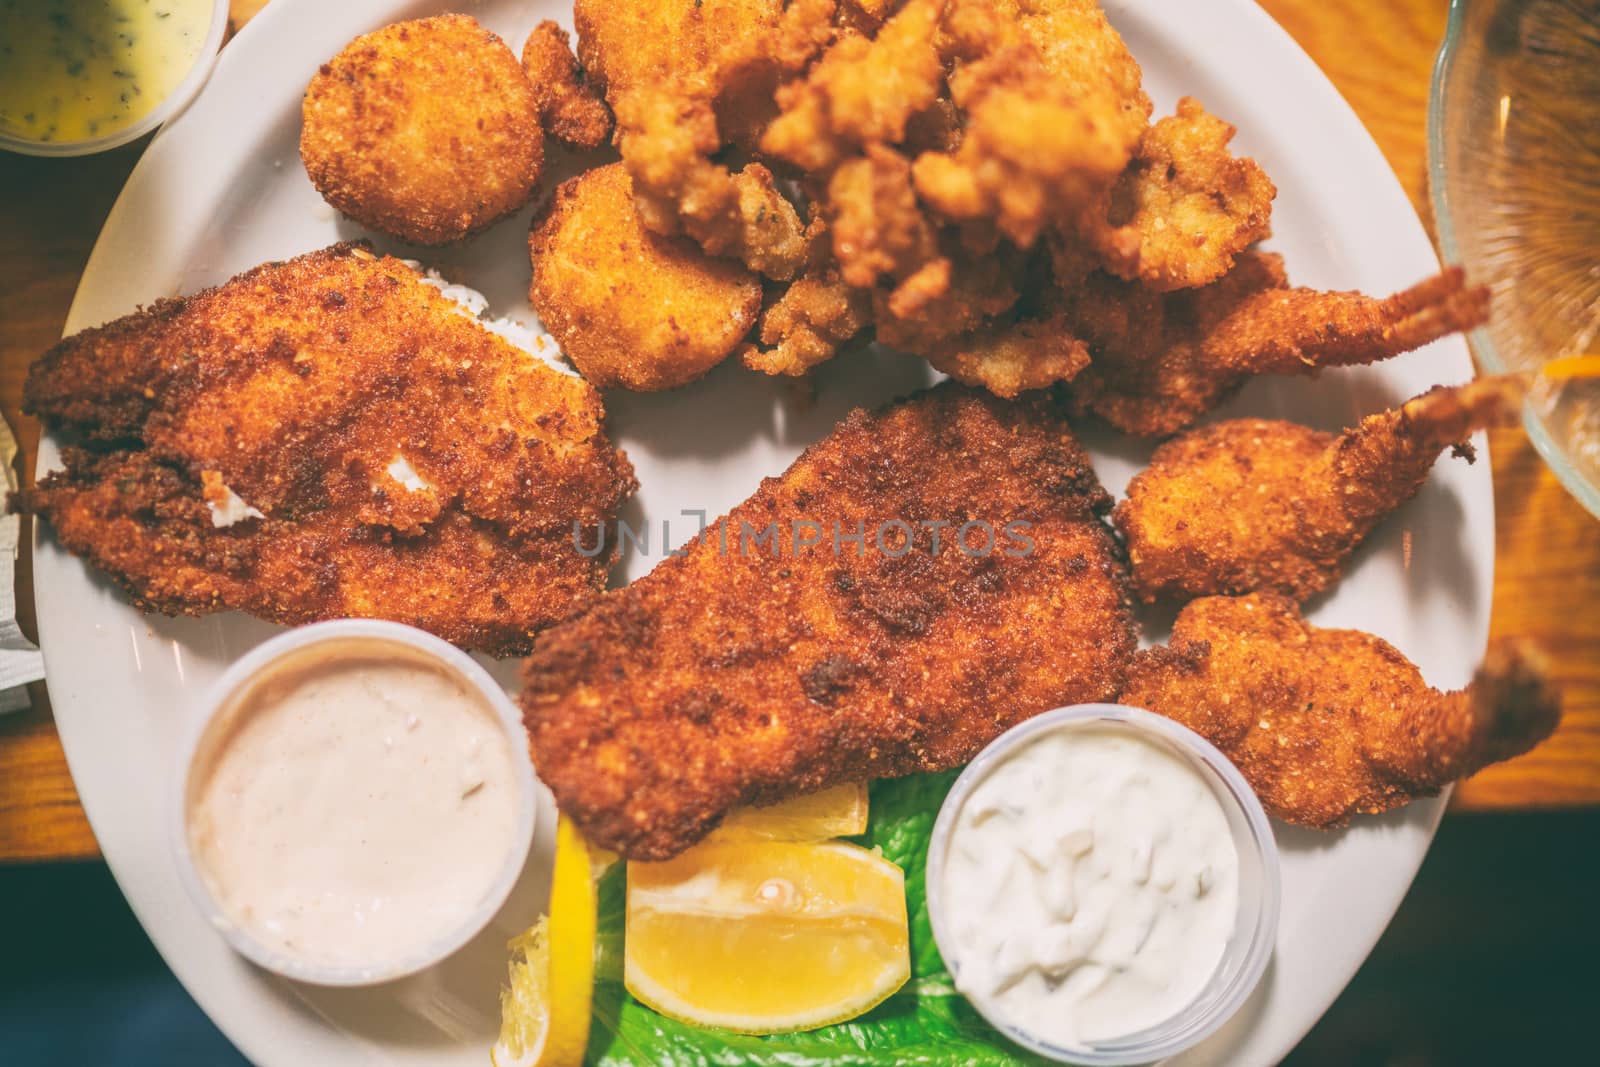 Fried seafood platter top view of local dish from Key West, Florida, Conch fritters, cod fish in oily batter fry by Maridav